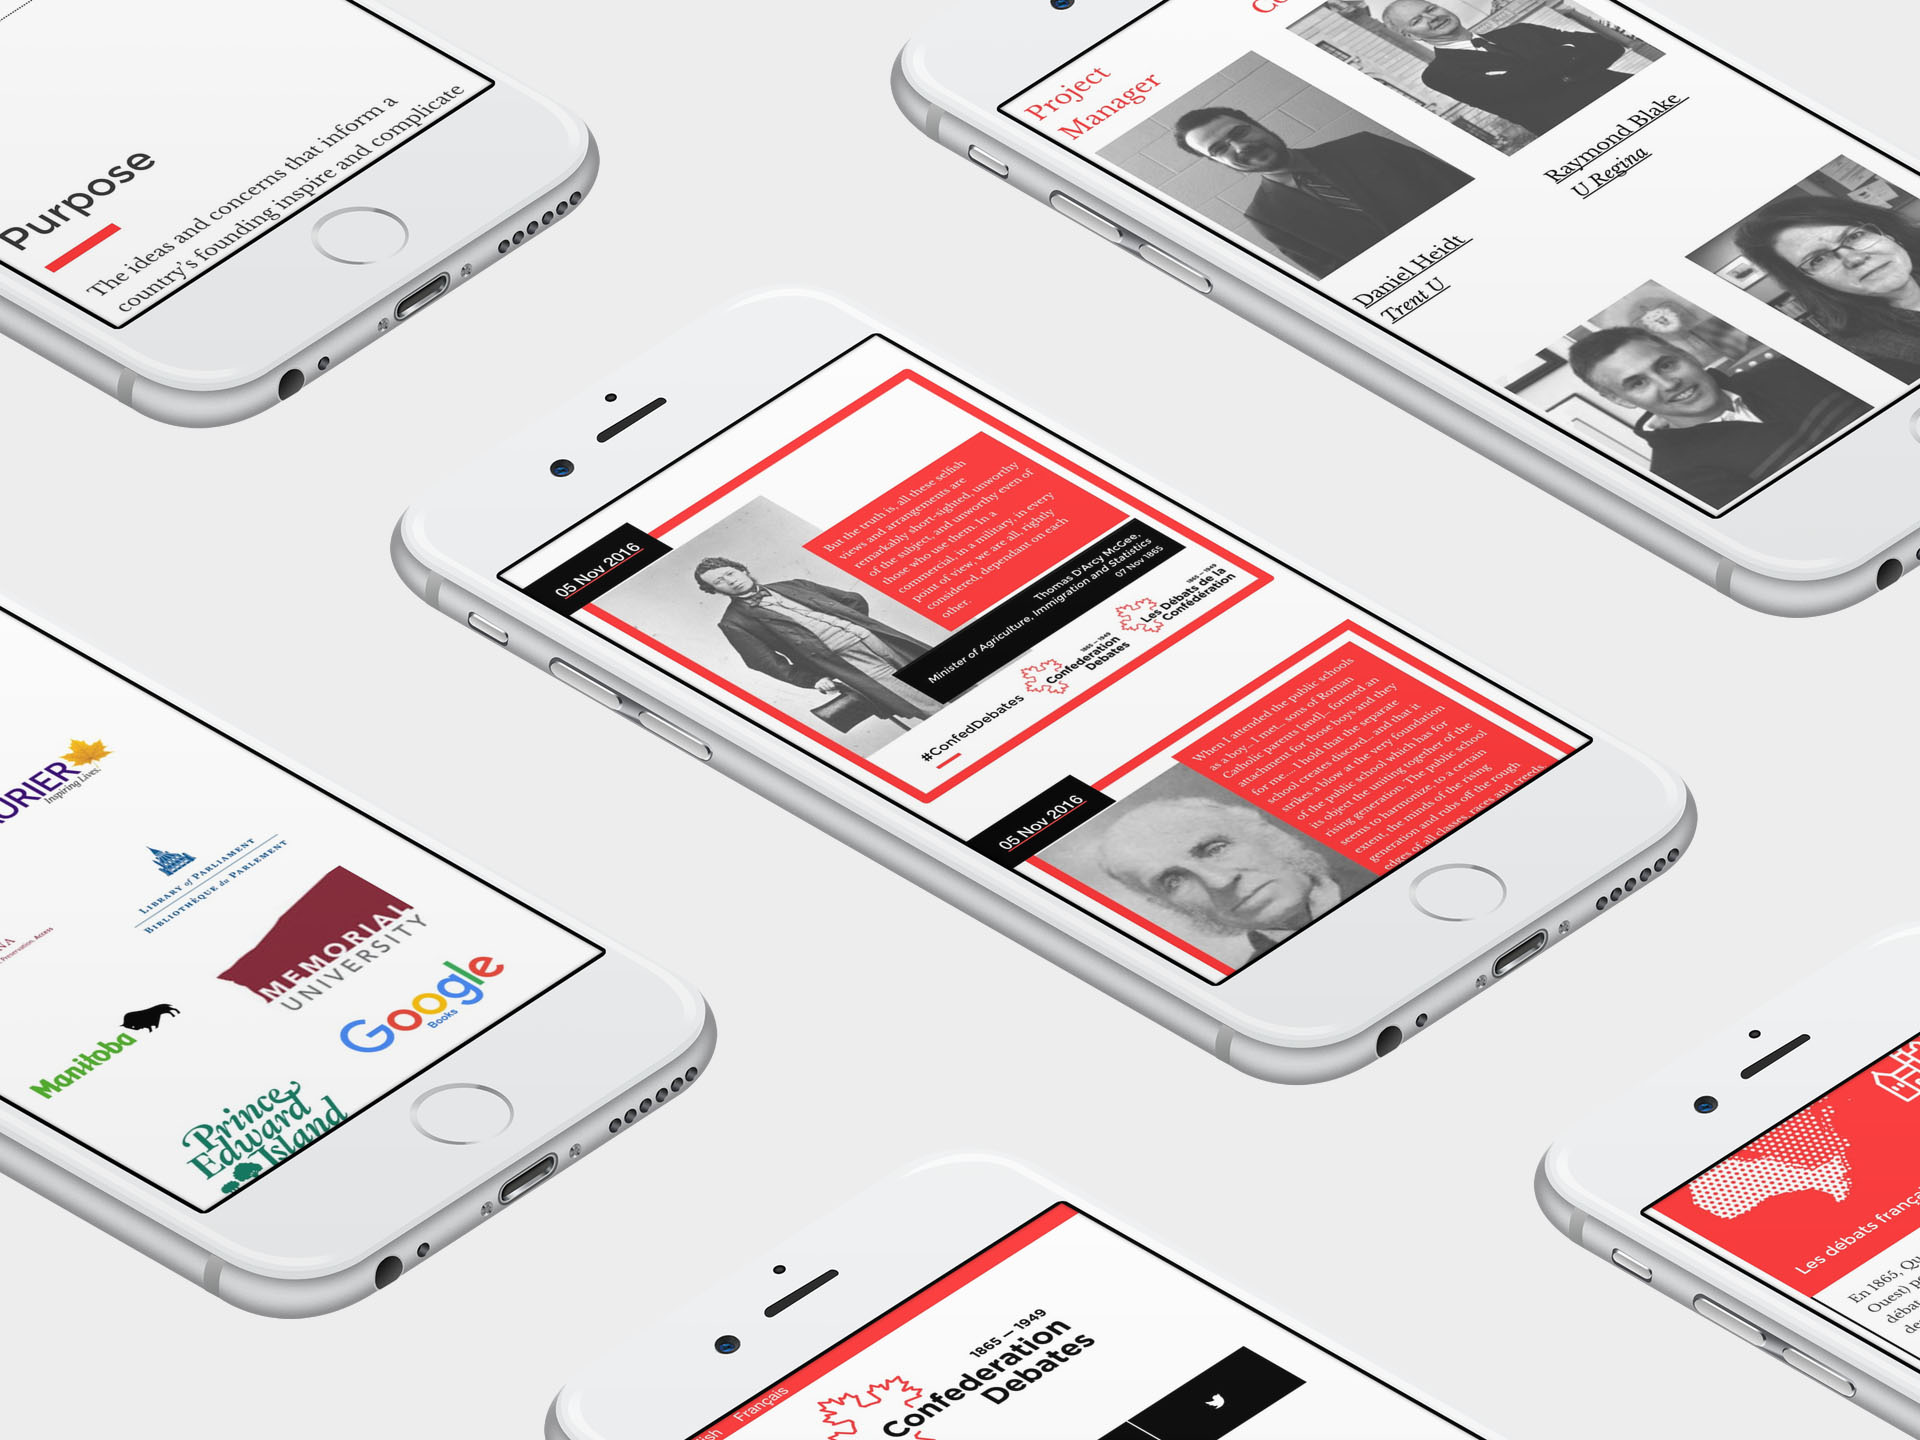 Mobile site layouts